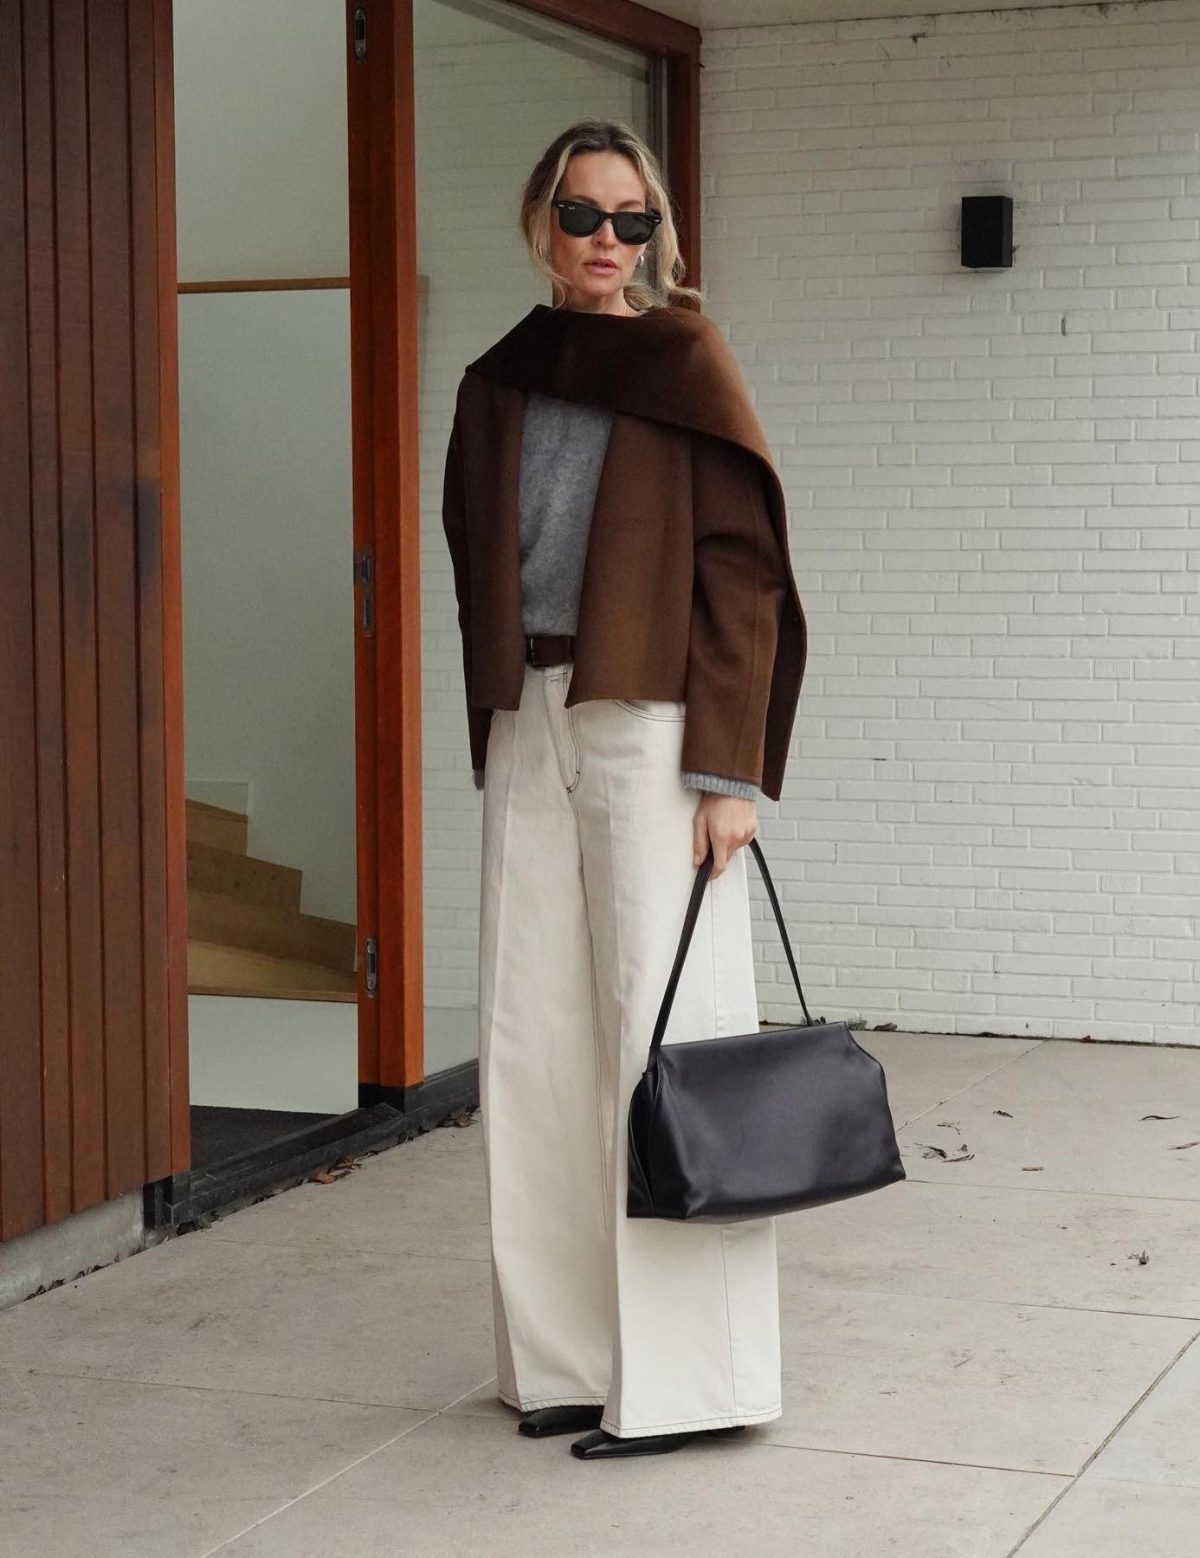 Baggy white jeans with a brown scarf ciar and grey sweater.